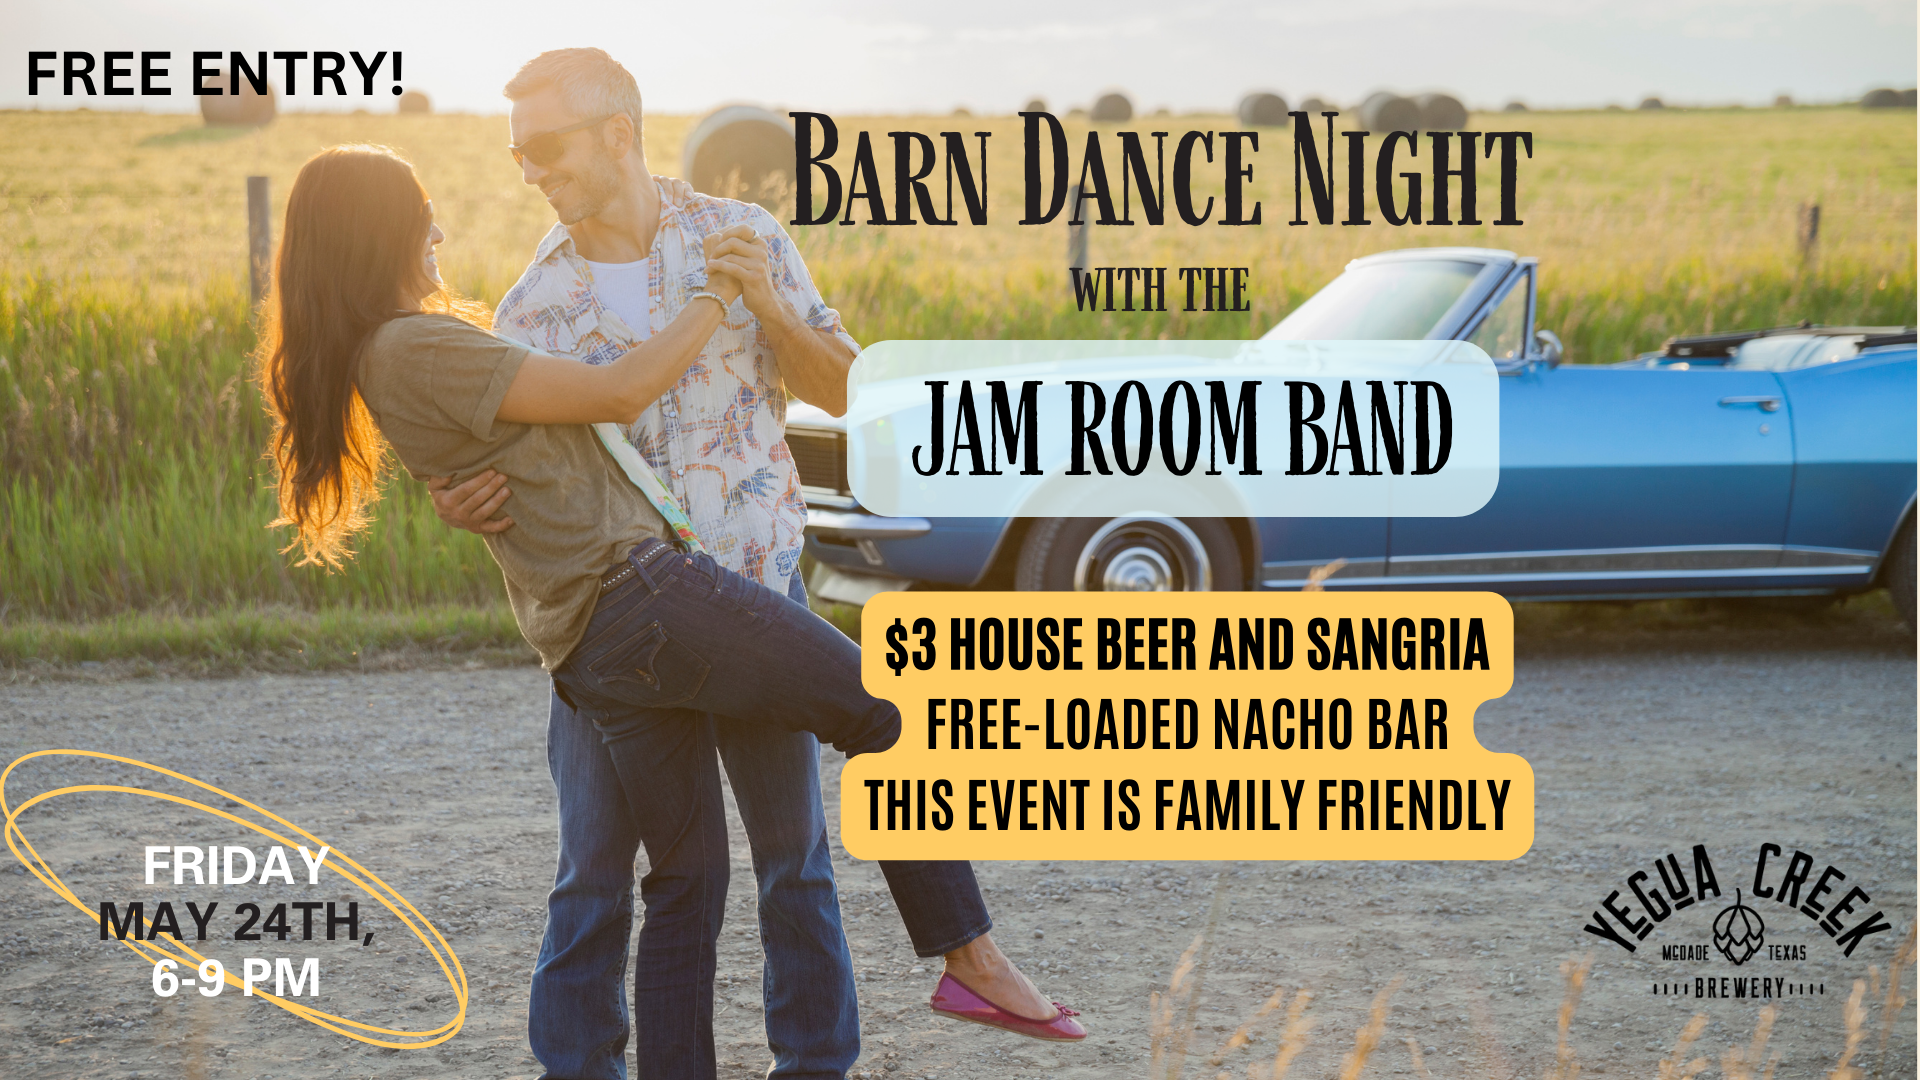 Barn Dance Night! Updated time: 6-9pm